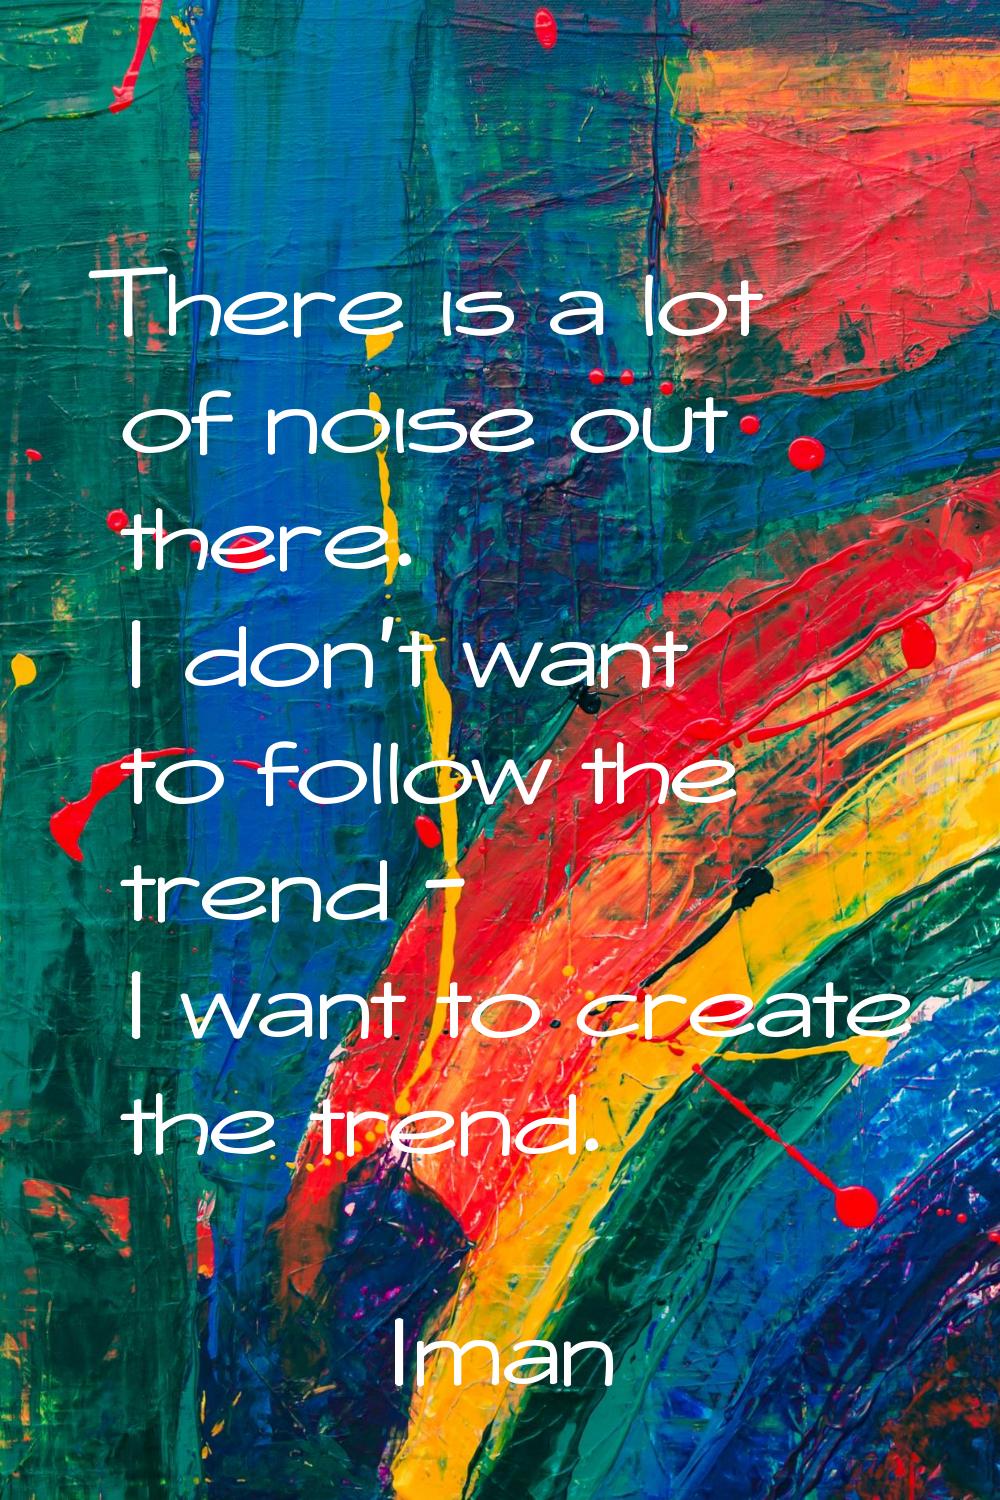 There is a lot of noise out there. I don't want to follow the trend - I want to create the trend.